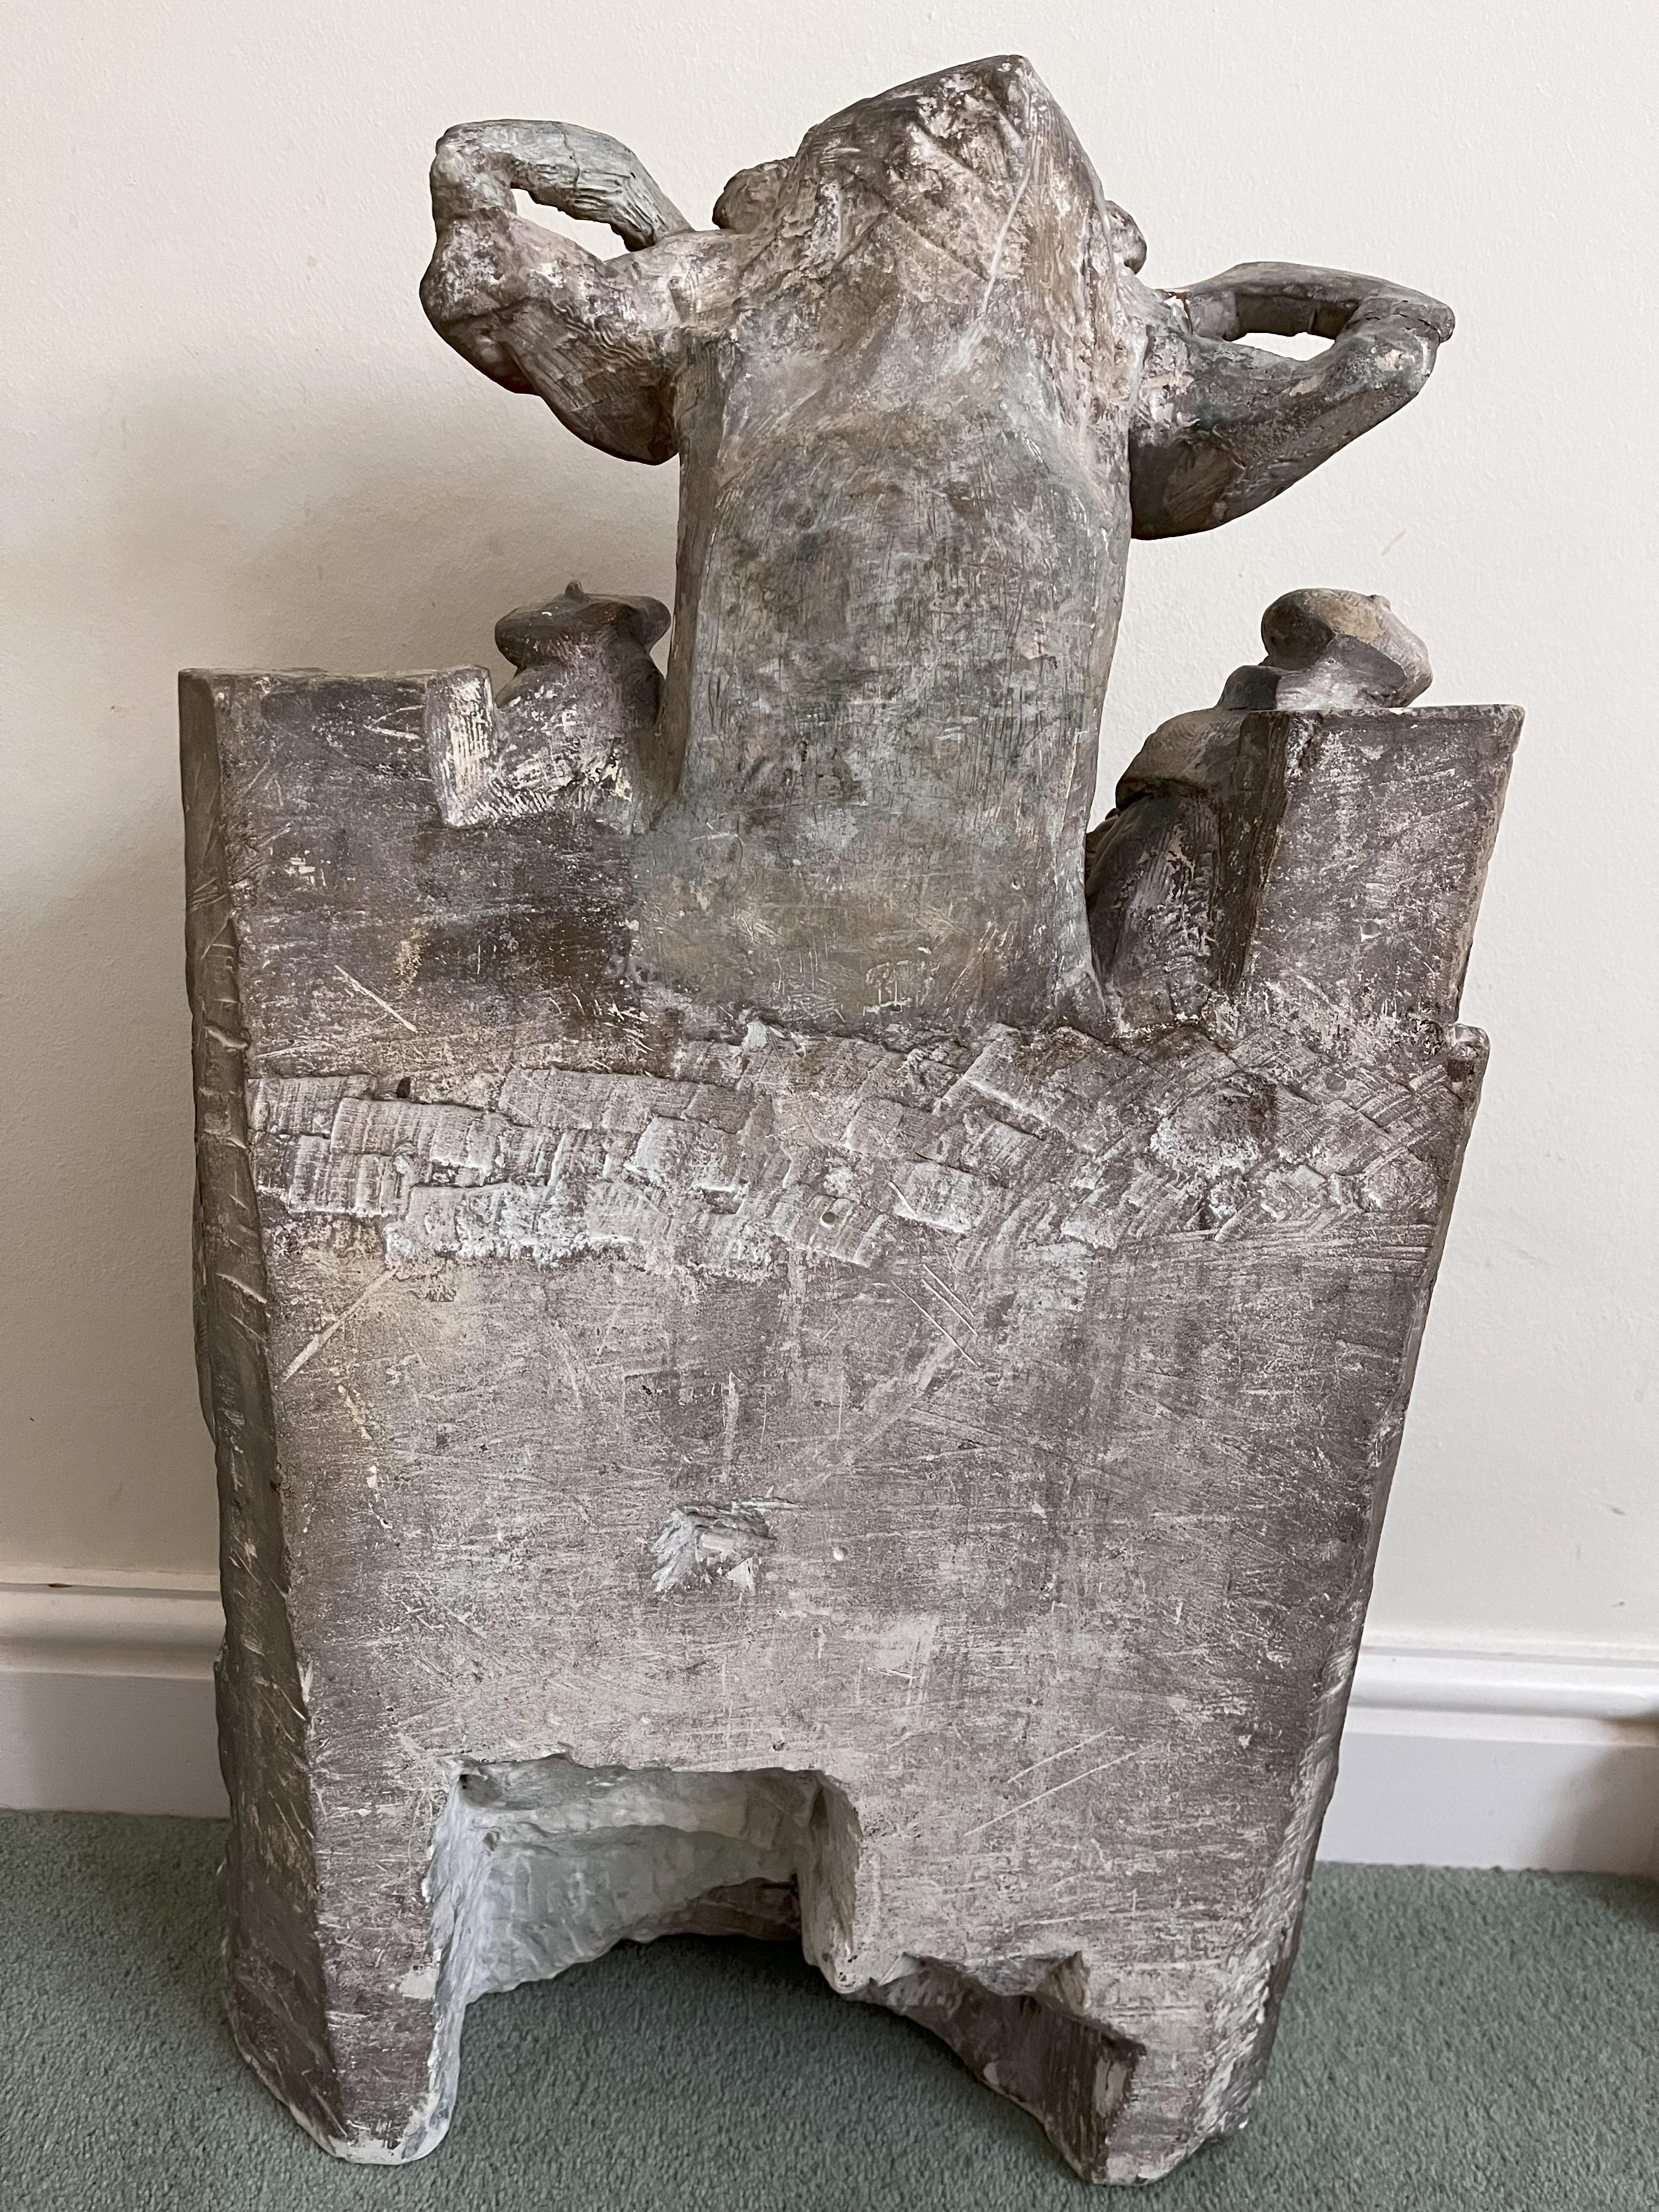 Hand-Carved Early 16th Century Stone Carving - 'The Death of a Prelate' For Sale